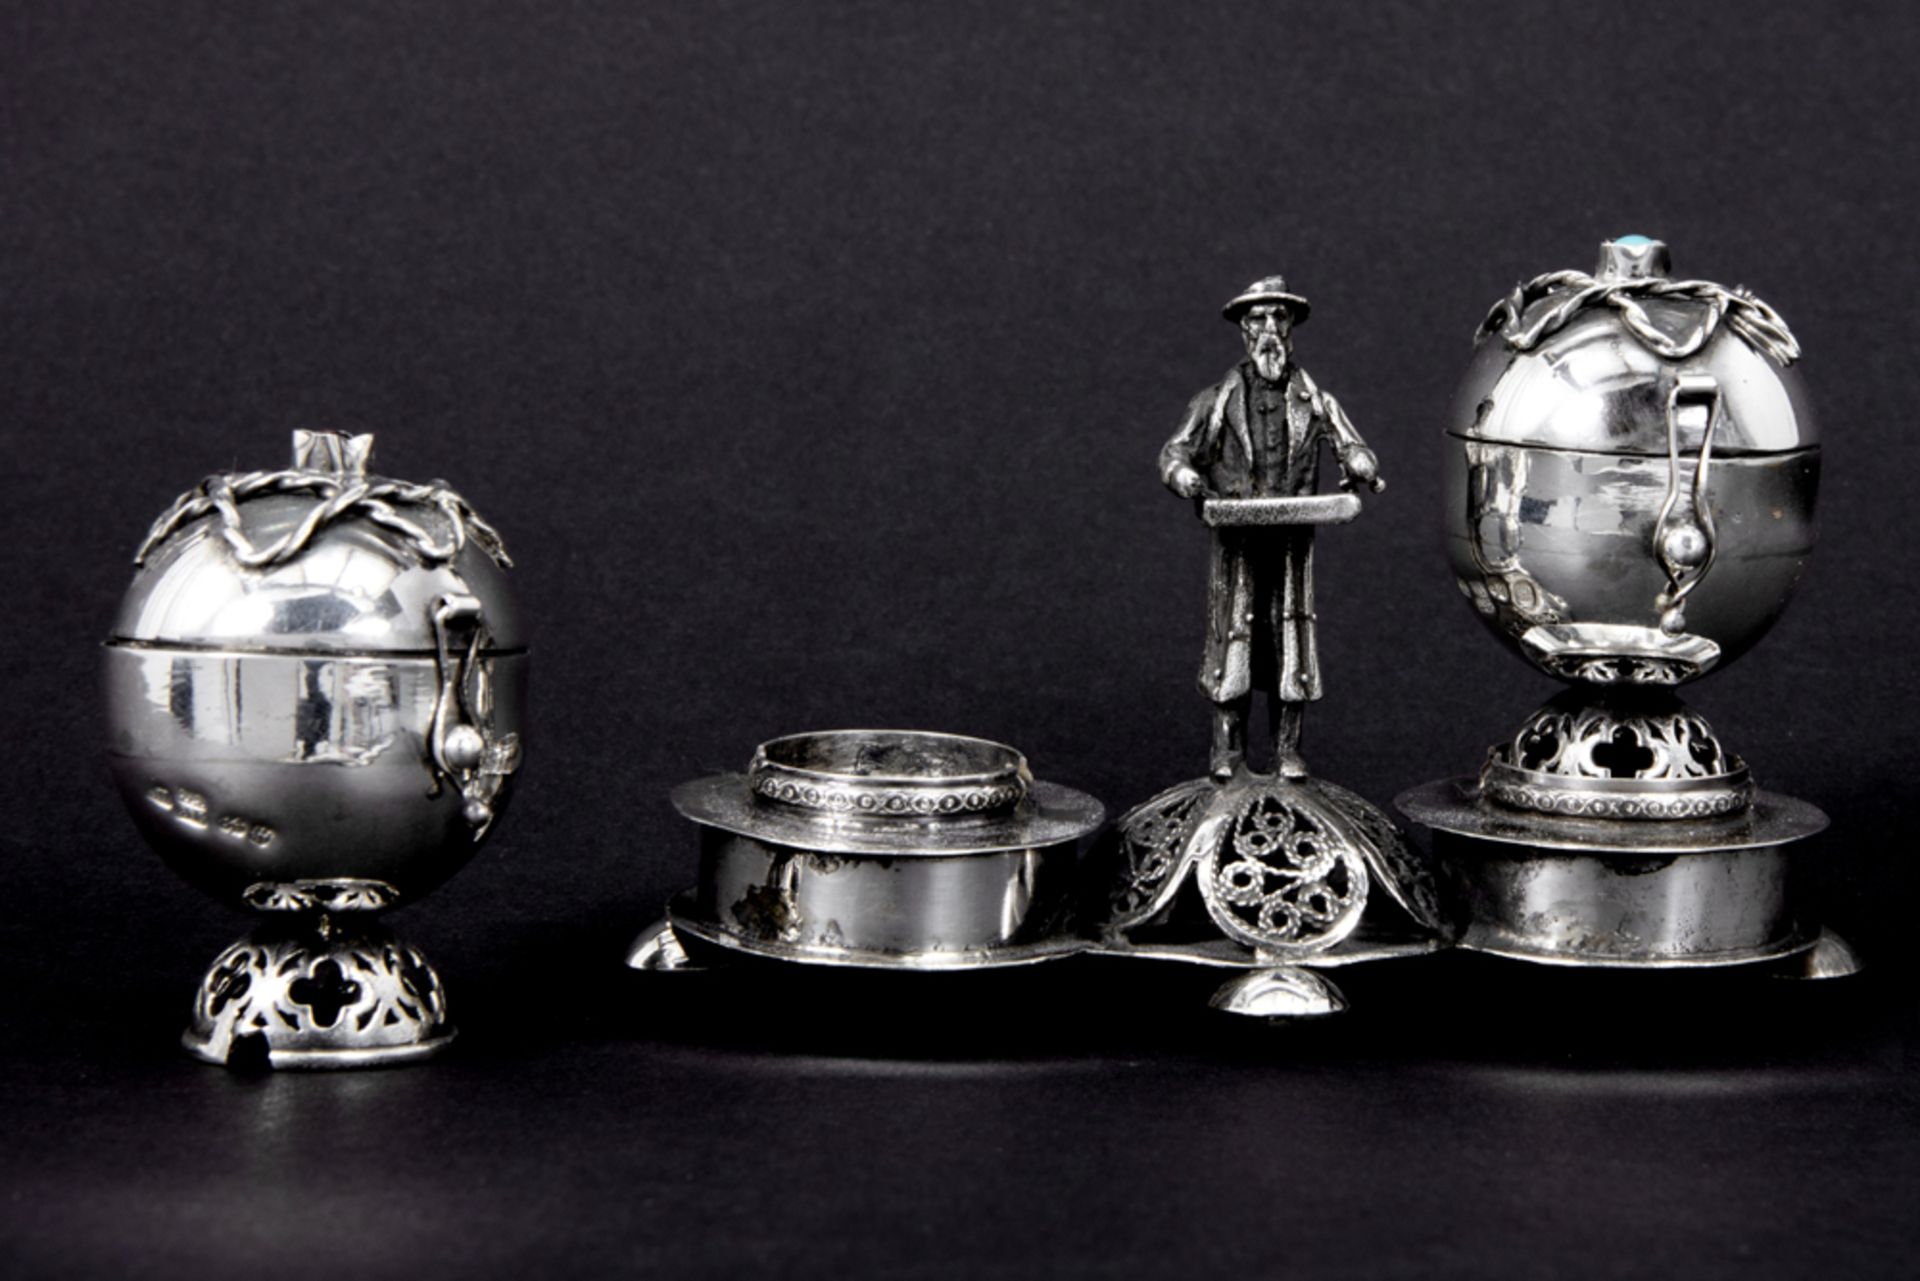 antique Polish salt cellar with two ovoid containers and a standing male figure - in "Warshau 84" - Bild 5 aus 6